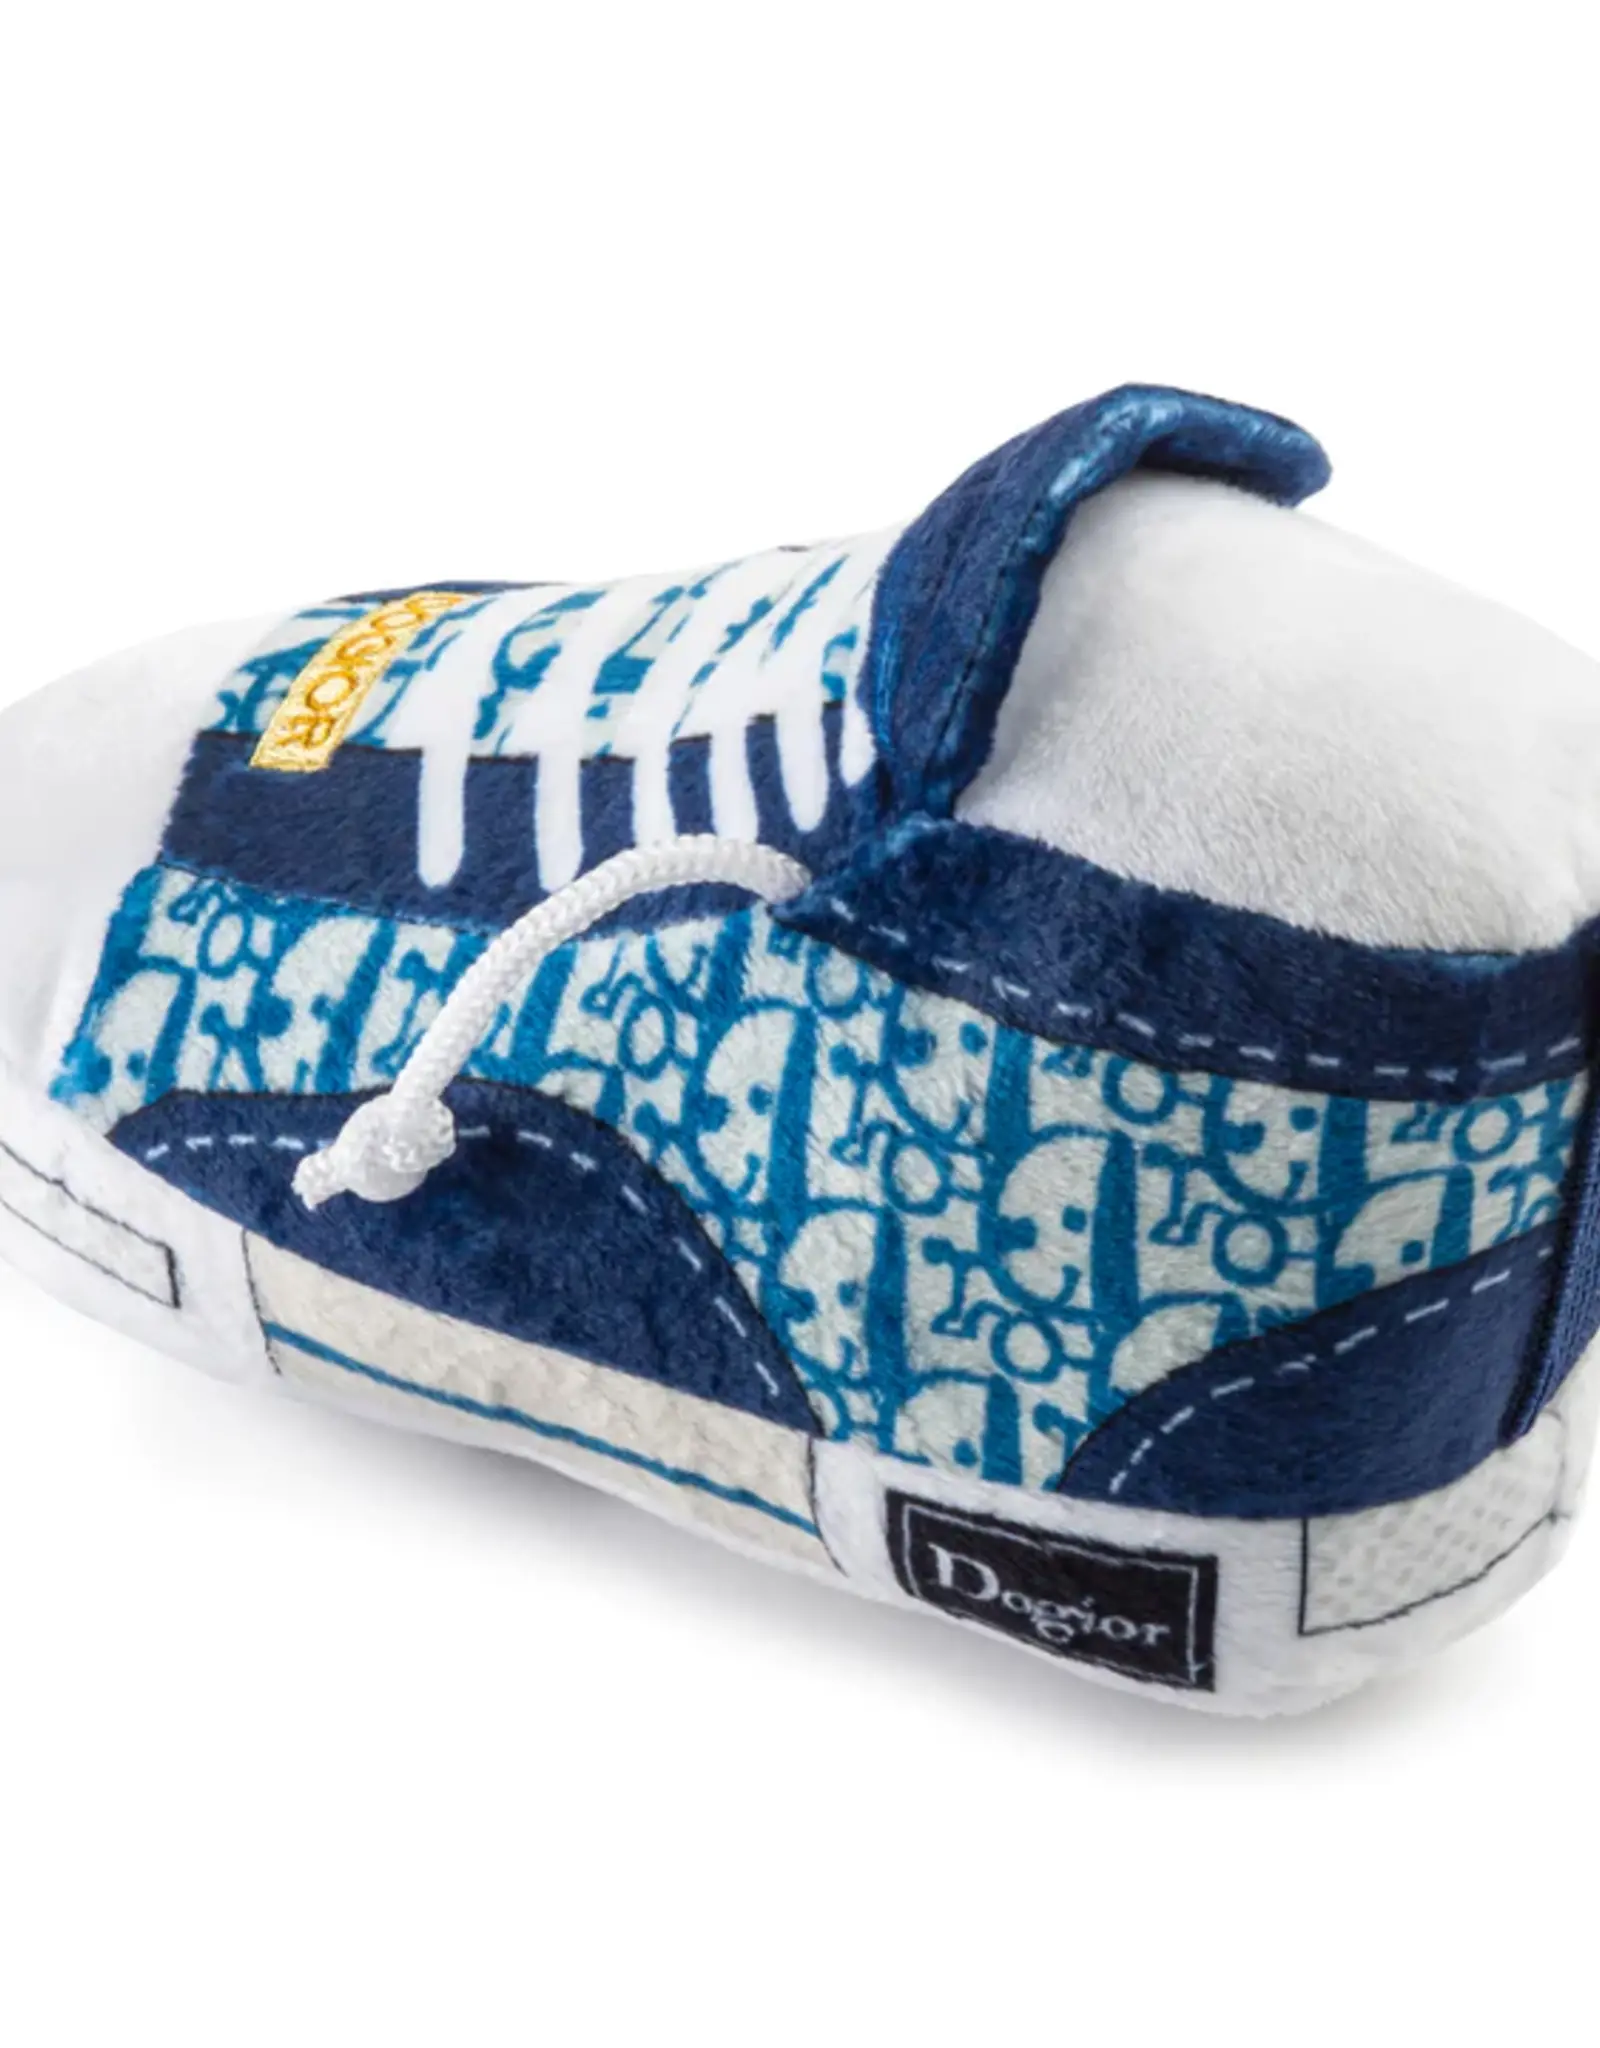 Haute Diggity Dog Haute Diggity Dog Dogior High-Top